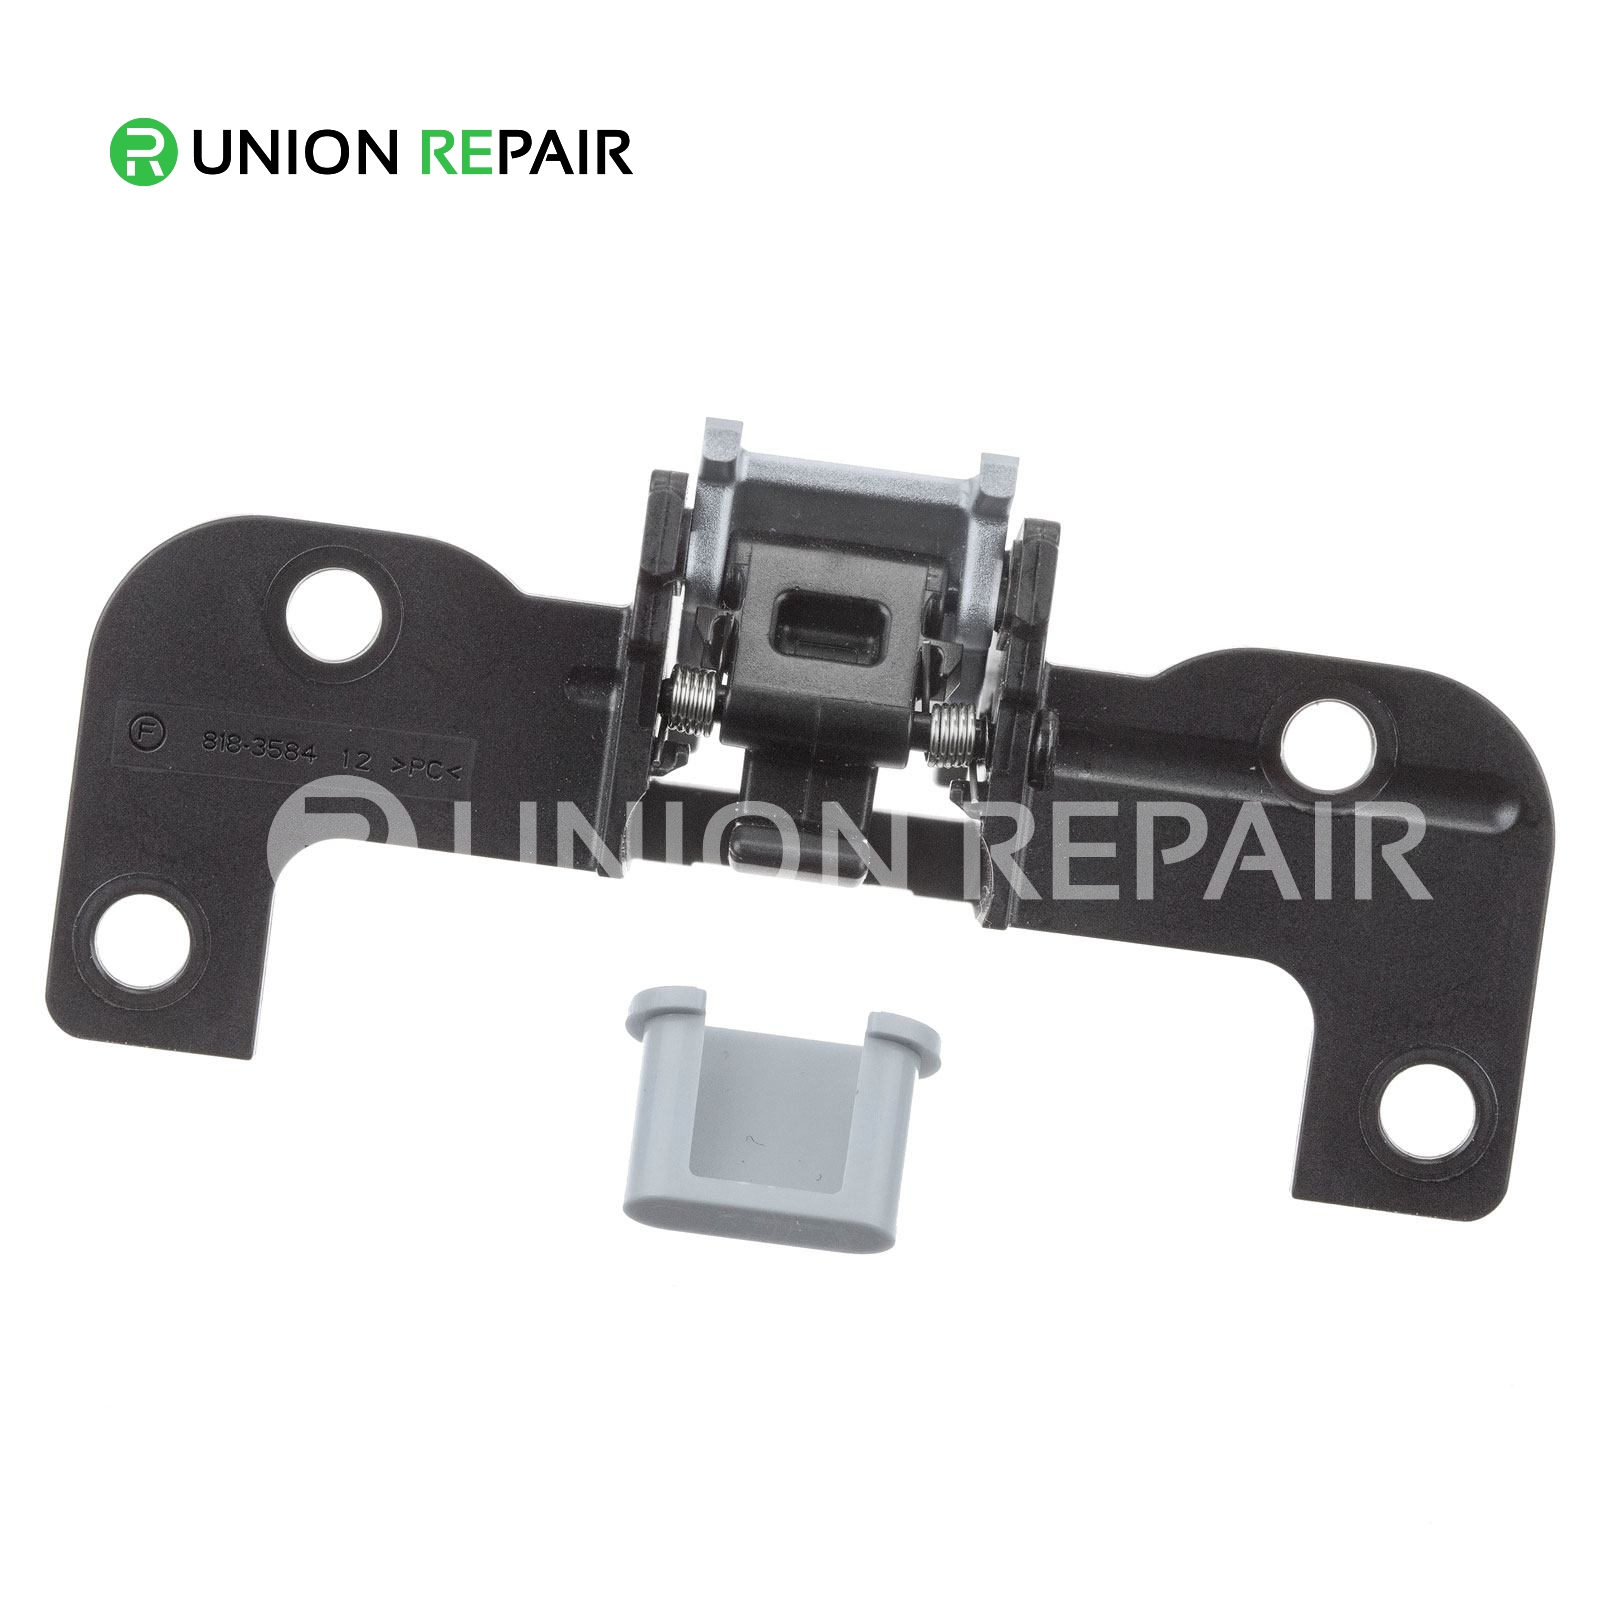 Memory Door Latch for iMac 27" A1419 (Late 2012)